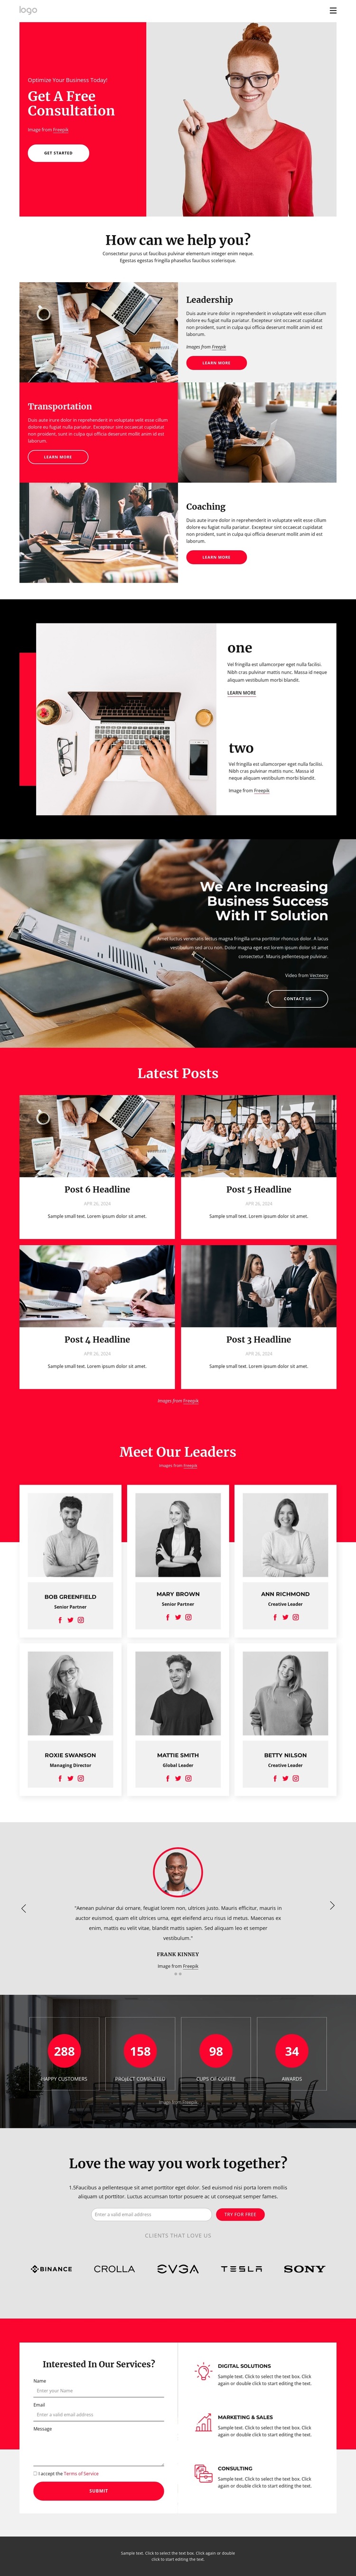 Business coaching and consulting HTML5 Template